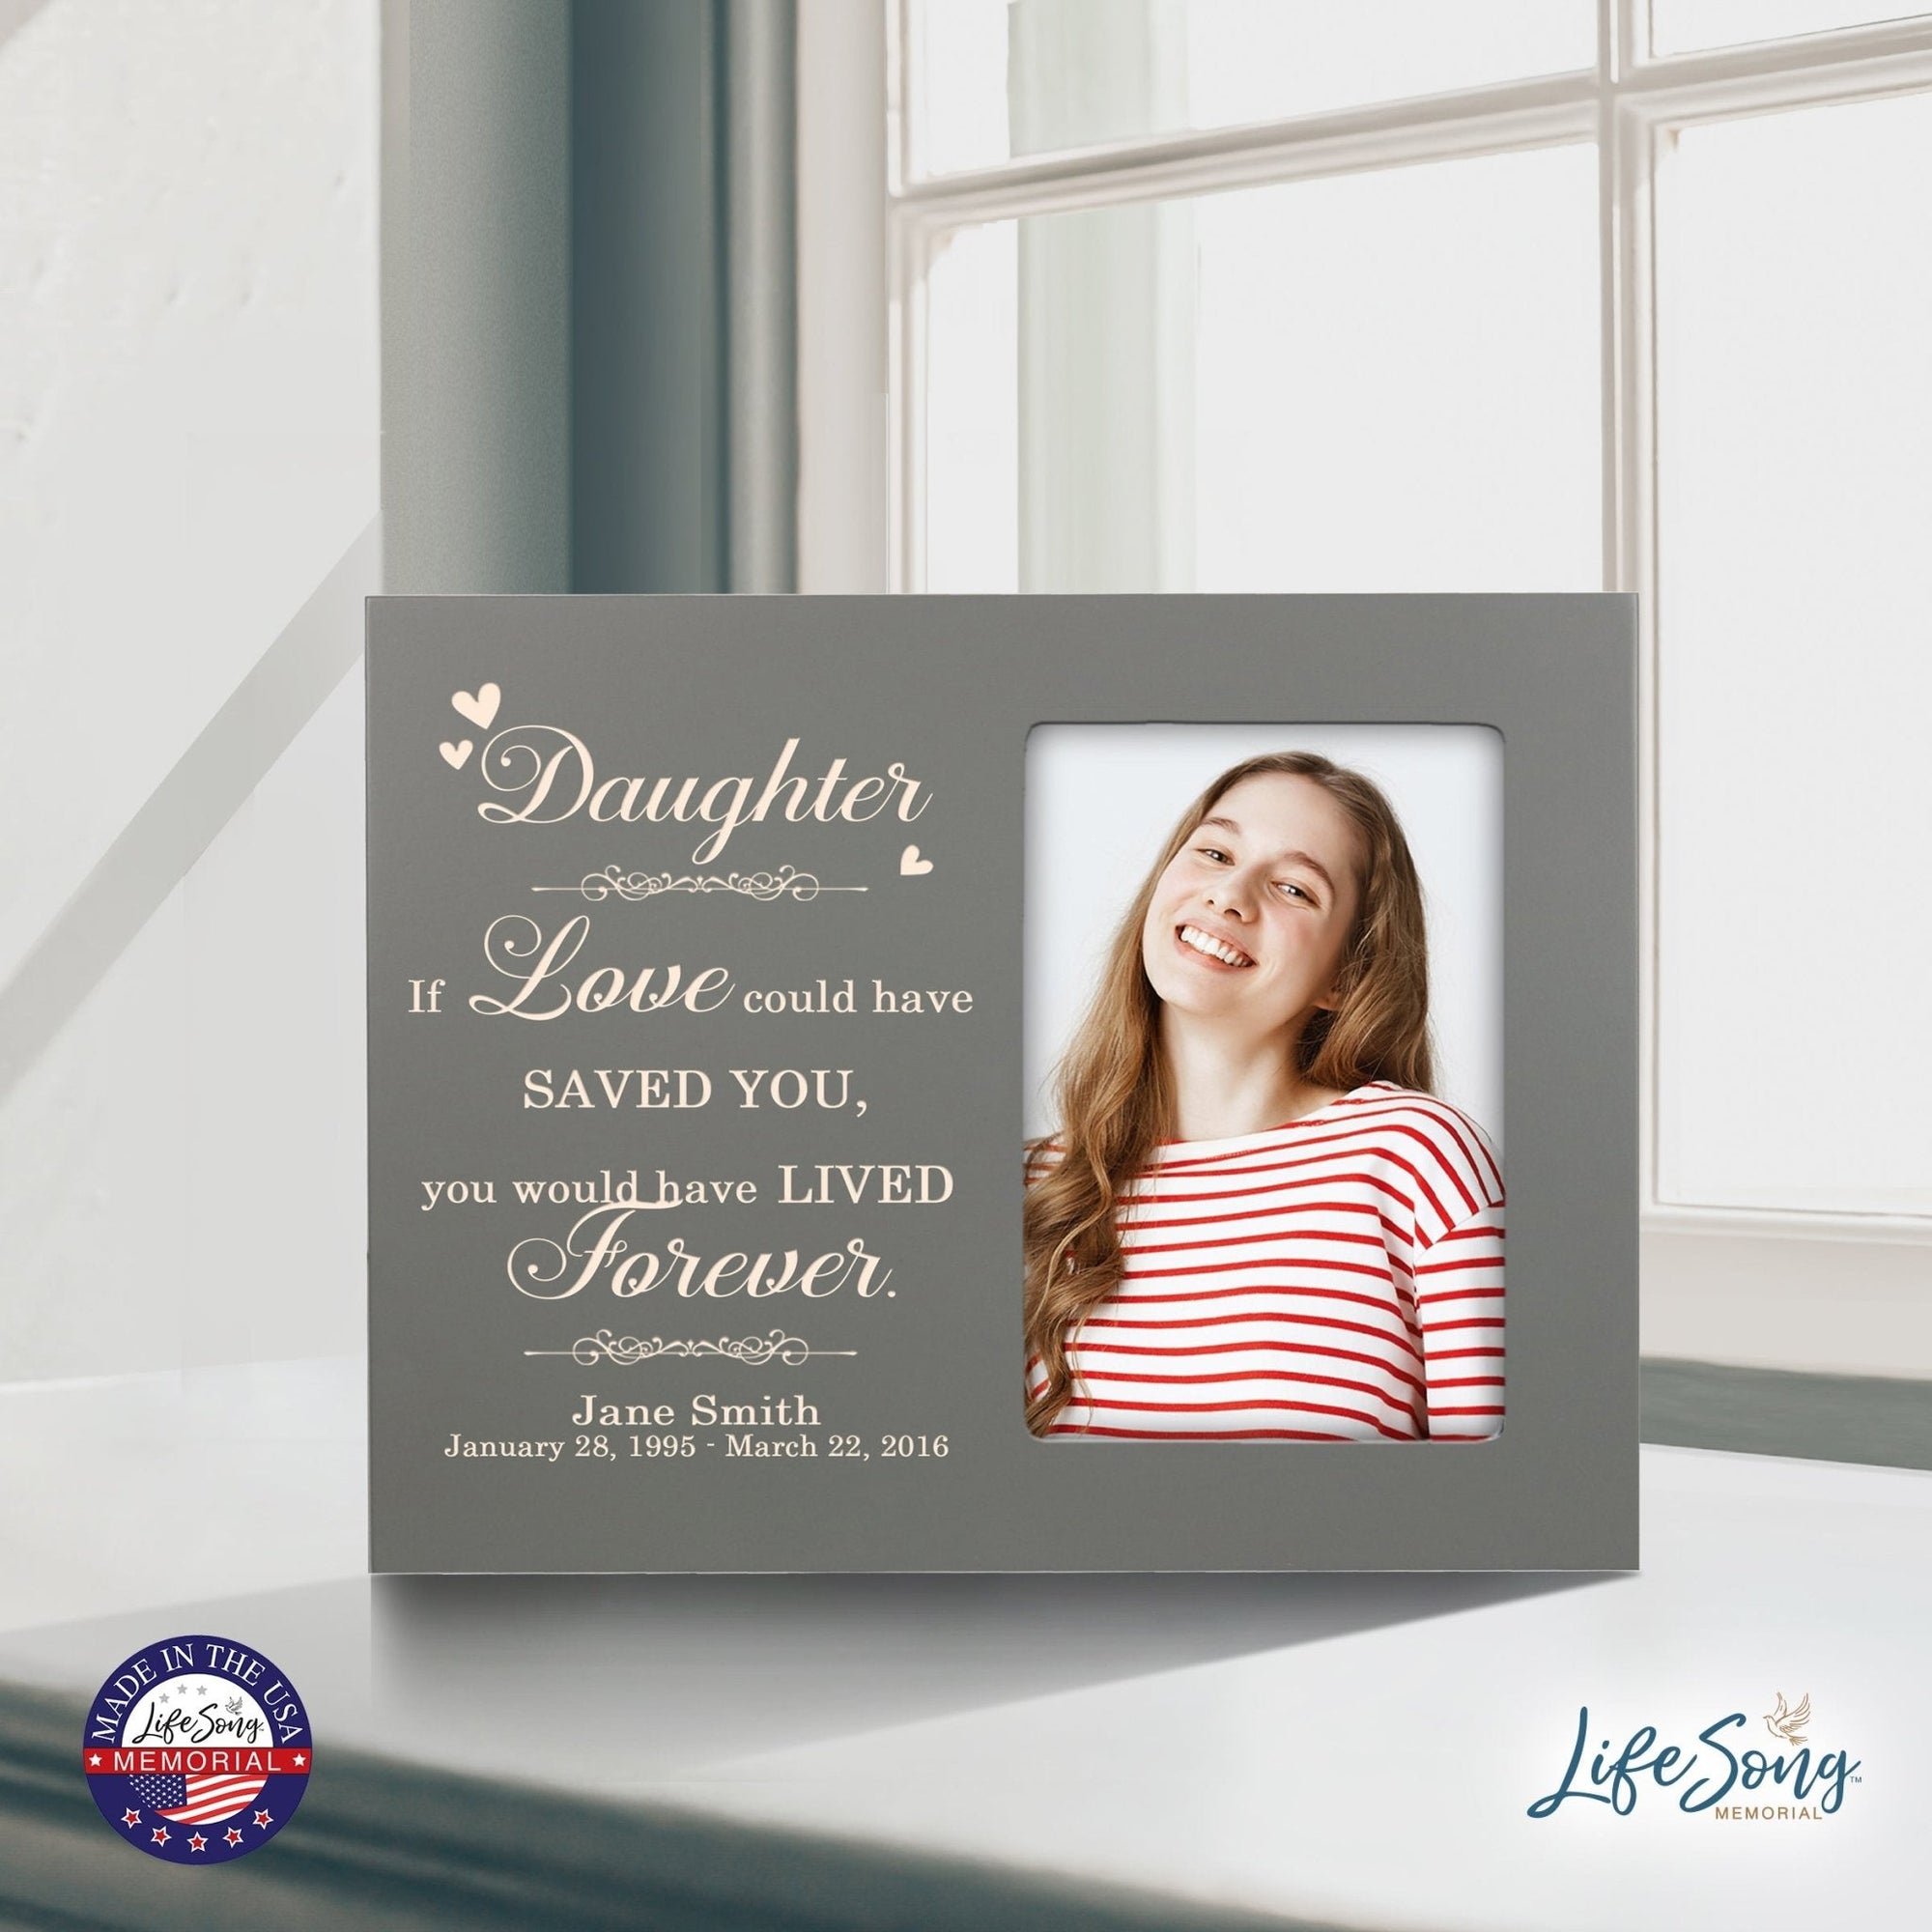 Personalized Horizontal 8x10 Wooden Memorial Picture Frame Holds 4x6 Photo - Daughter, If Love Could - LifeSong Milestones